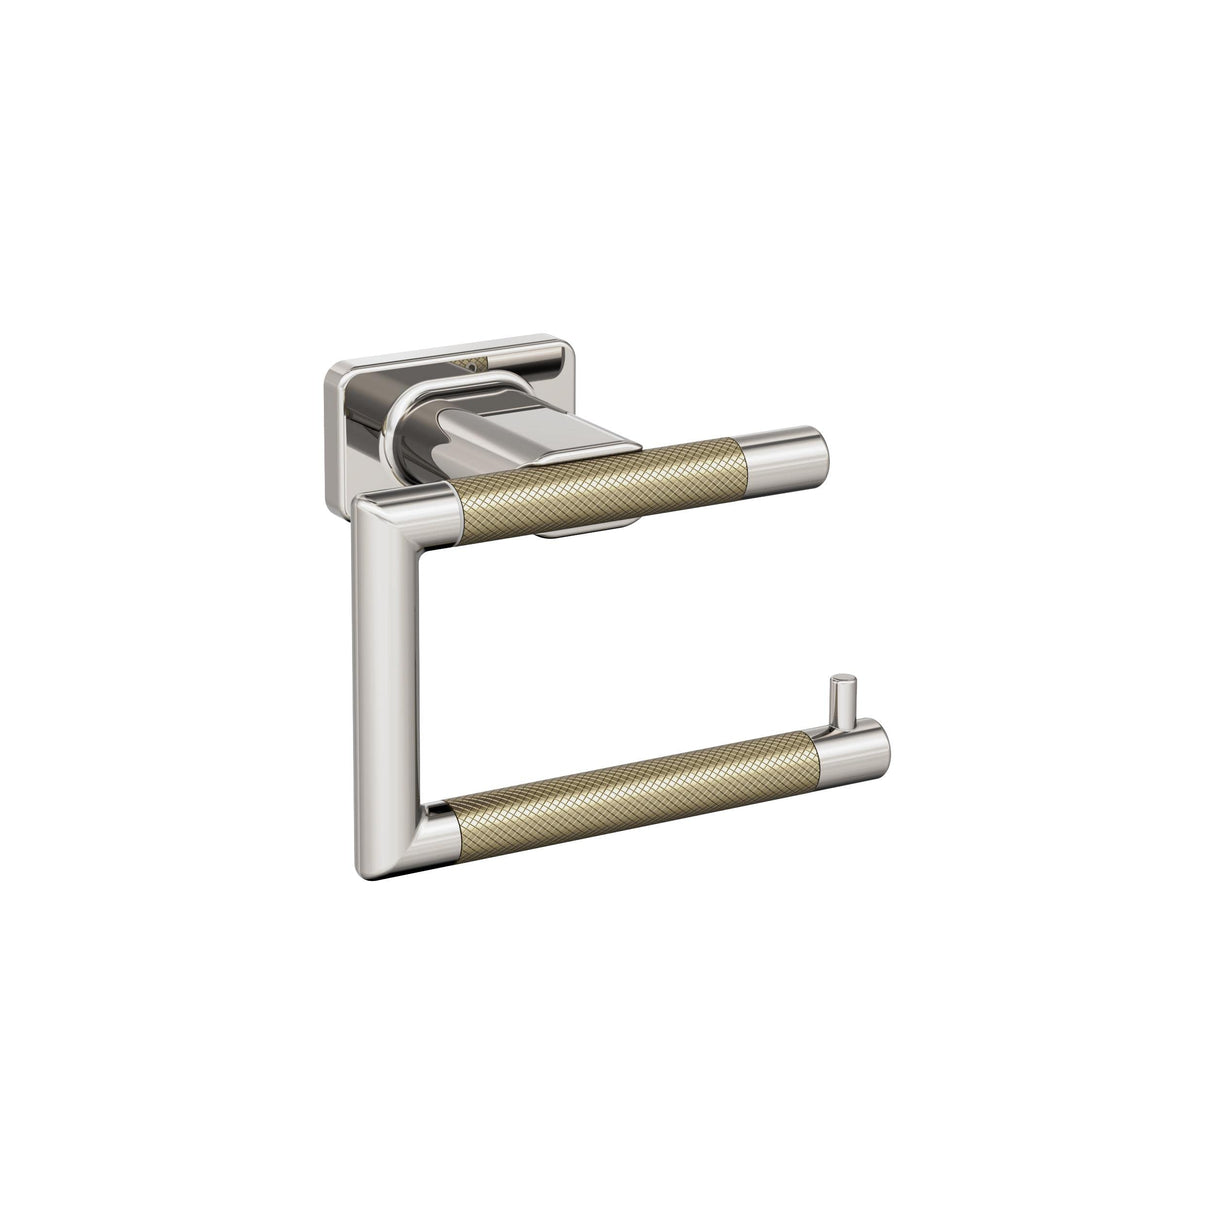 Amerock BH26617PNBBZ Polished Nickel/Golden Champagne Single Post Toilet Paper Holder 5-7/8 in. (149 mm) Toilet Tissue Holder Esquire Bath Tissue Holder Bathroom Hardware Bath Accessories